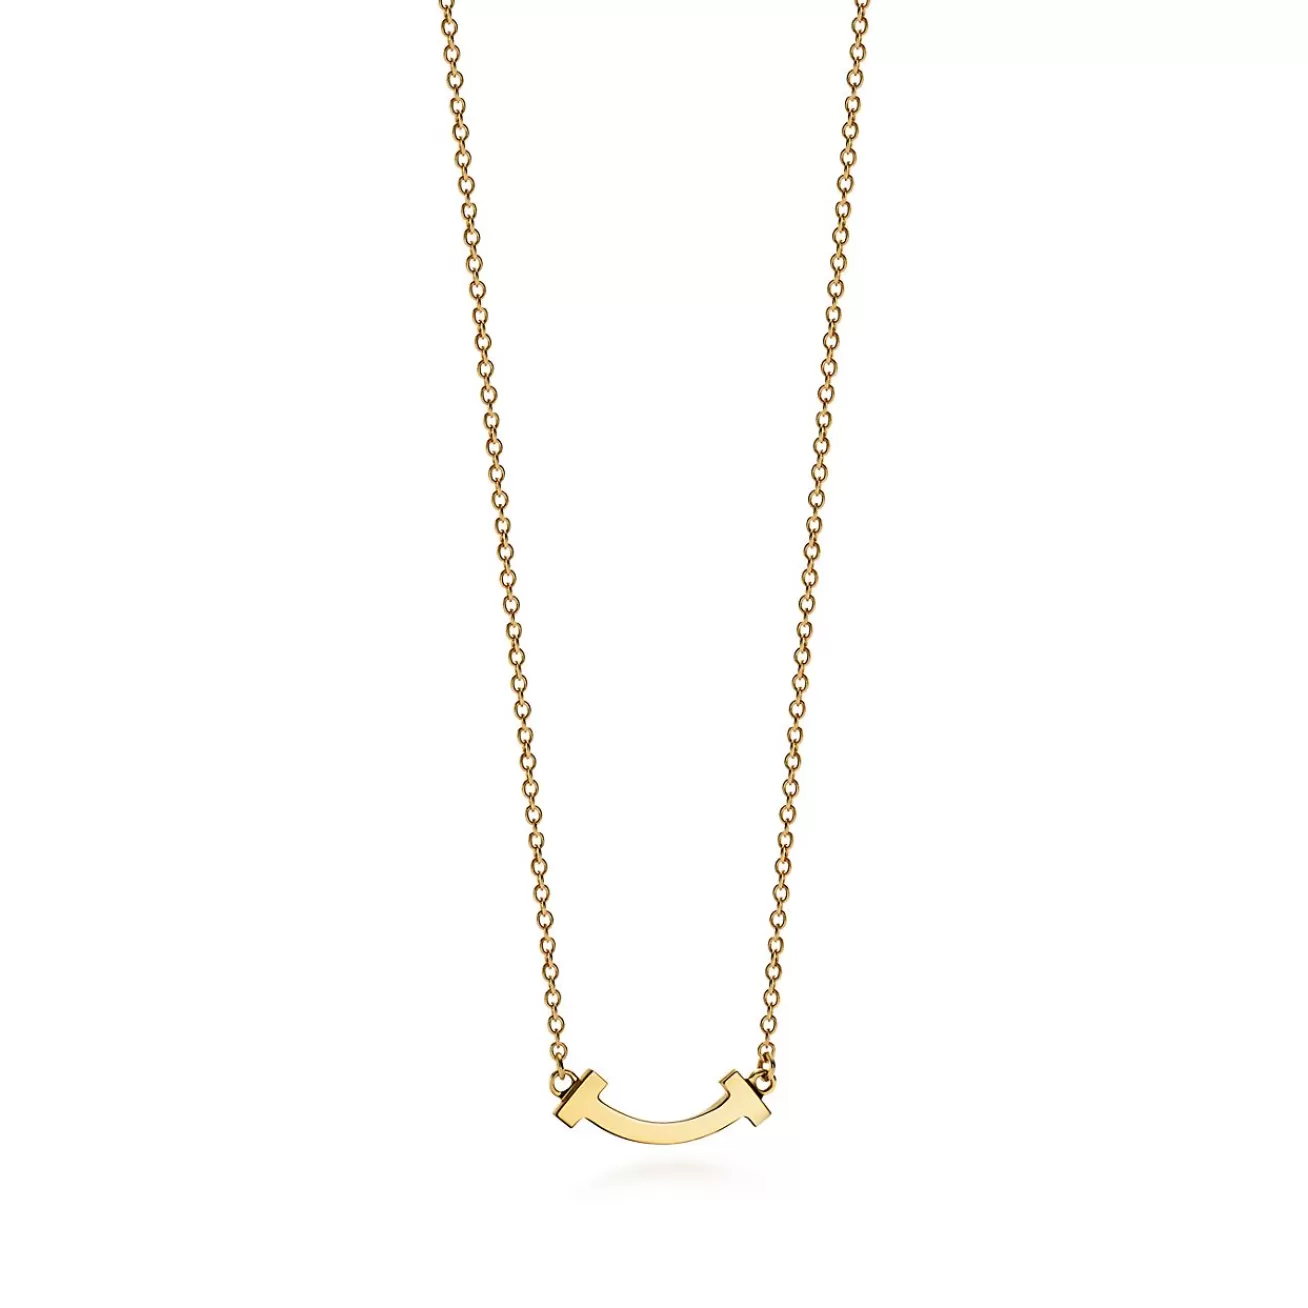 Tiffany & Co. Tiffany T smile pendant in 18k gold, mini. | ^ Necklaces & Pendants | Gifts for Her